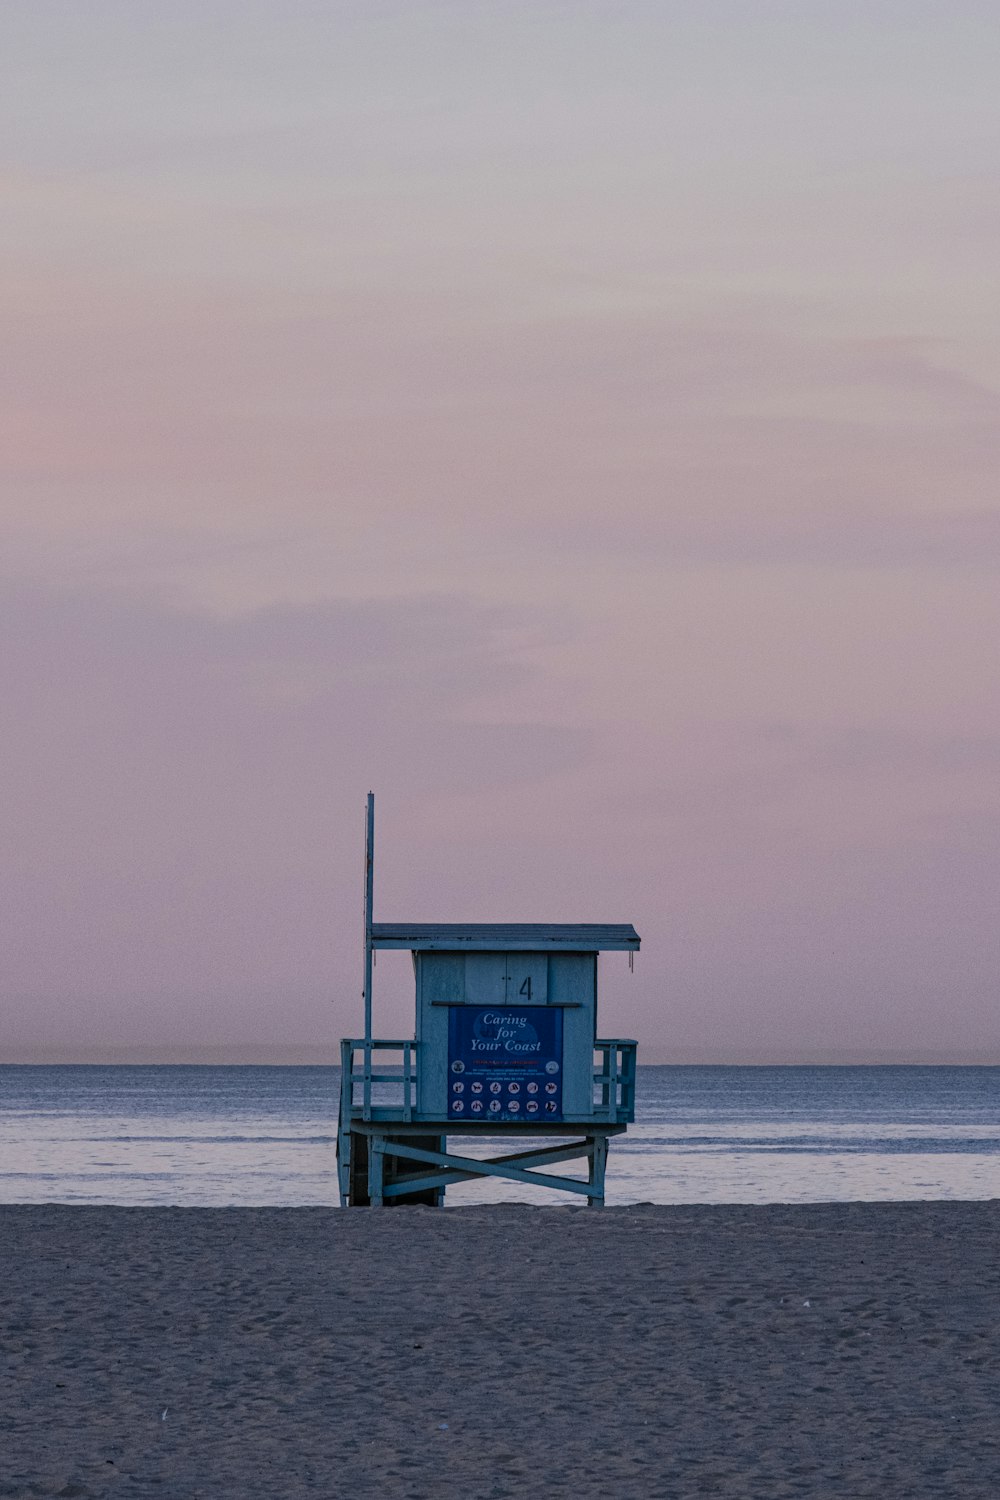 a lifeguard stand on the beach at sunset